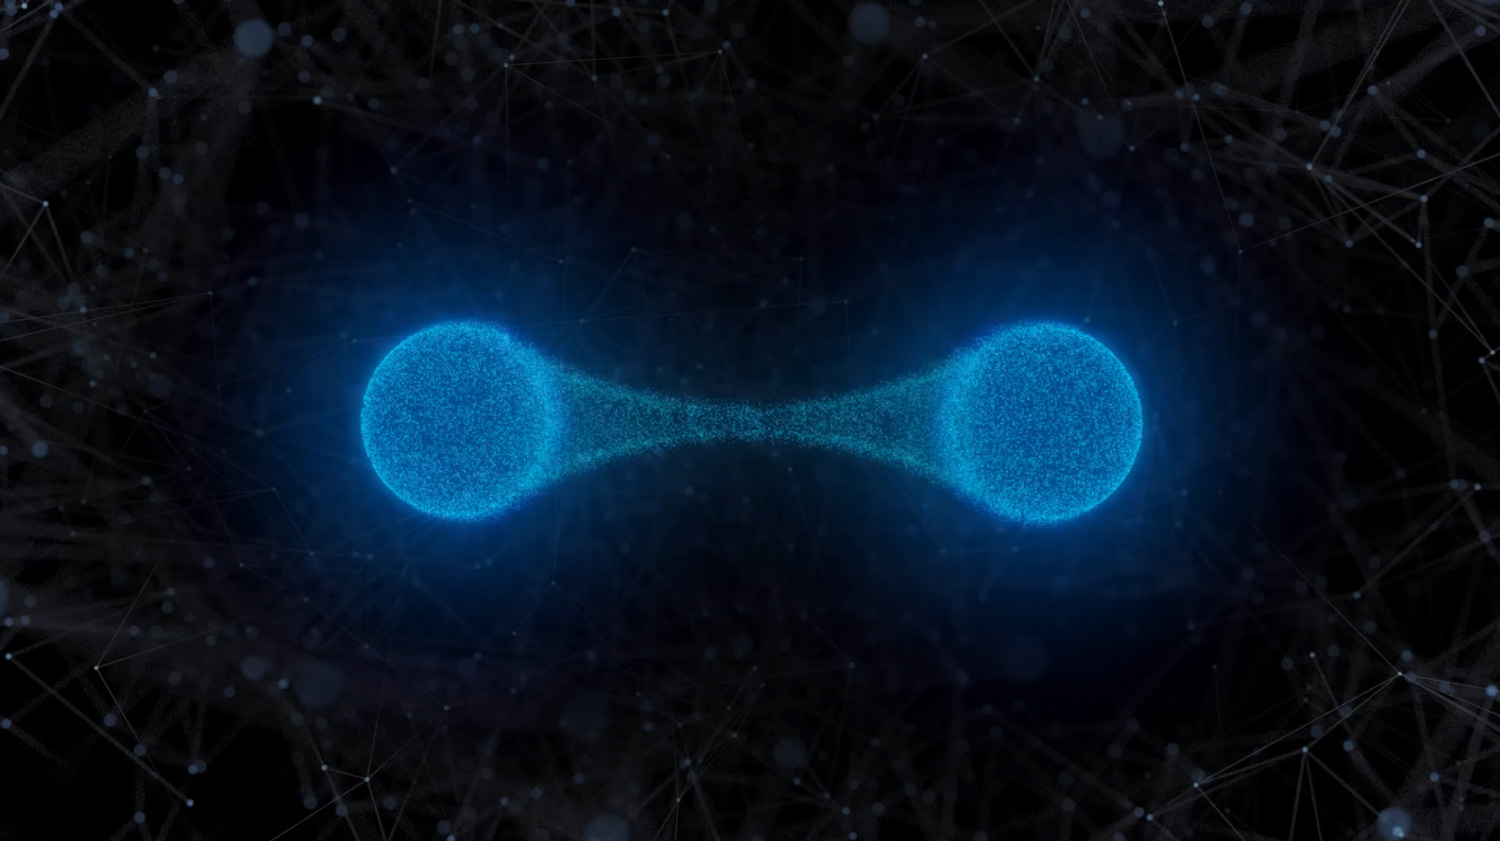 Entangled photons possess a “spooky action at a distance”, as Einstein already put it.